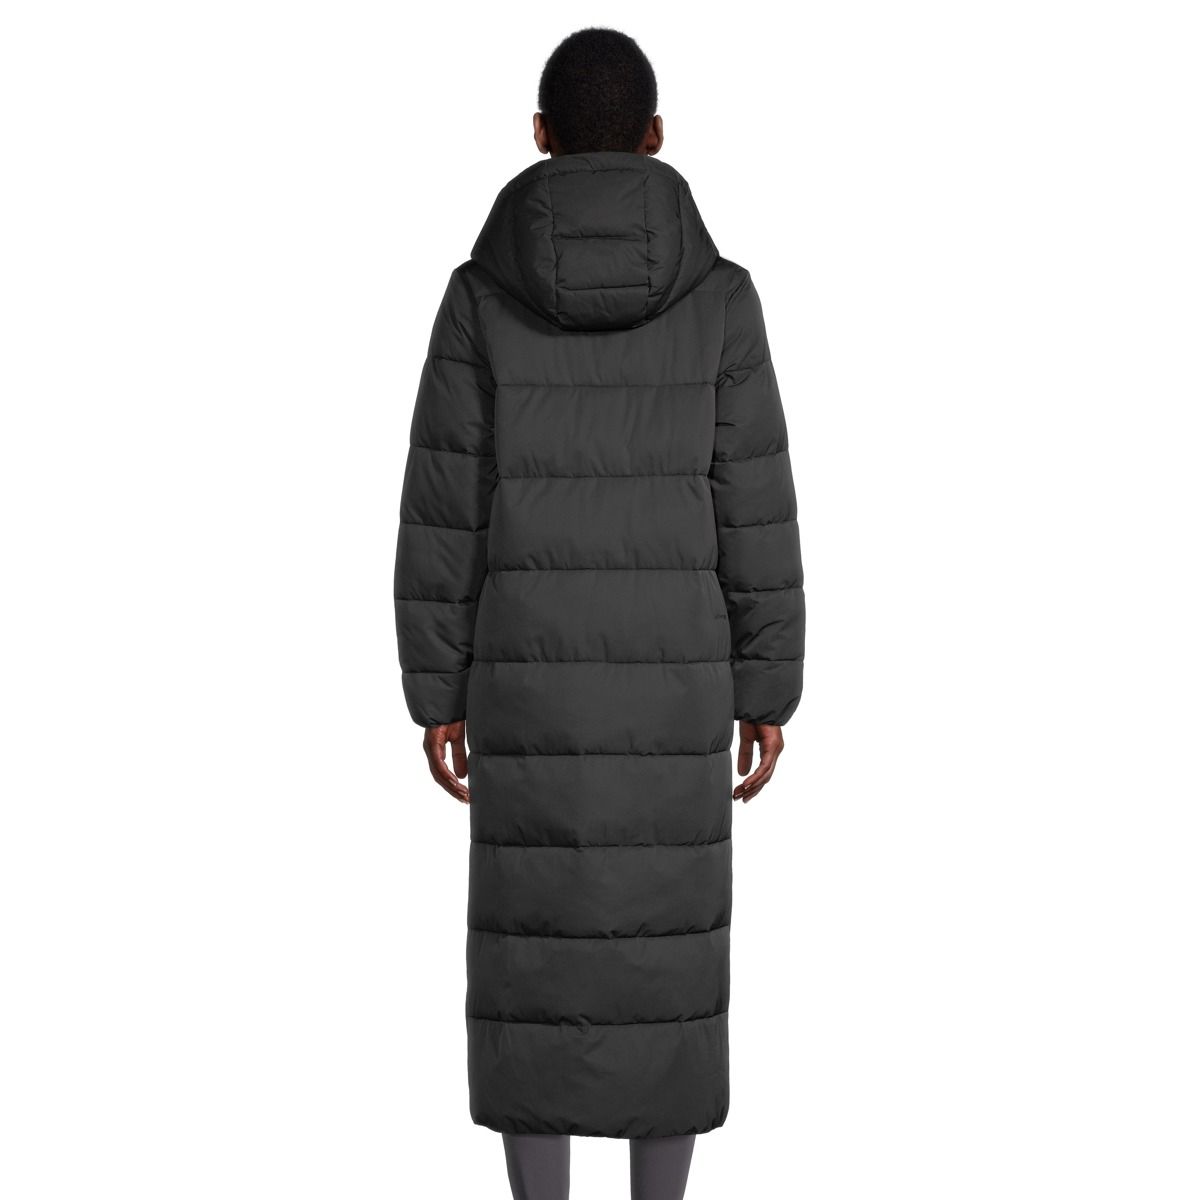 Long Puffer Jacket with 40% discount!